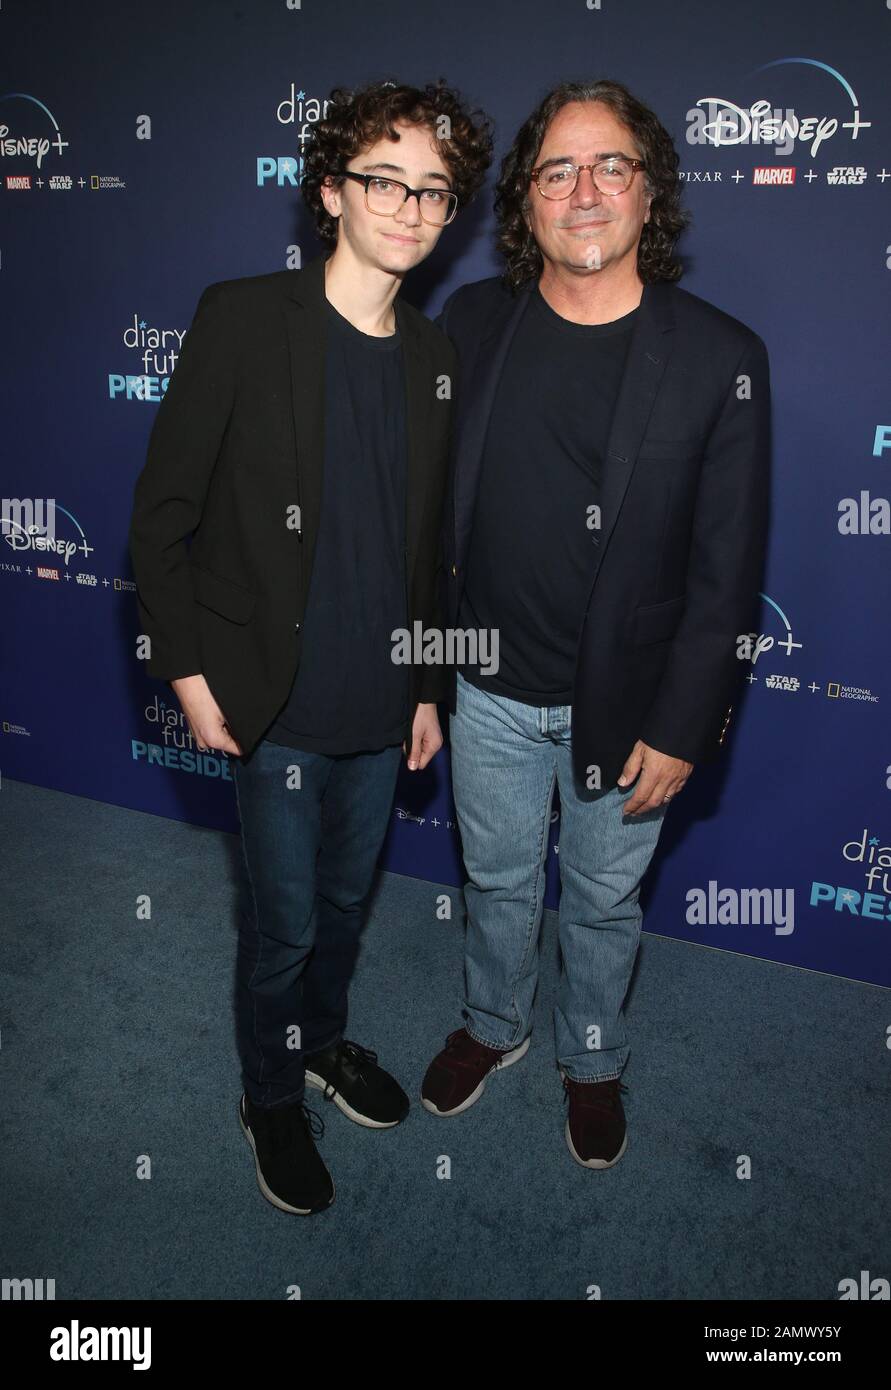 14 January 2020 - Hollywood, California - Brad Silberling, Bodhi Russell Silberling. Premiere Of Disney +'s ''Diary Of A Future President held at the ArcLight Cinemas. (Credit Image: © Fs/AdMedia via ZUMA Wire) Stock Photo